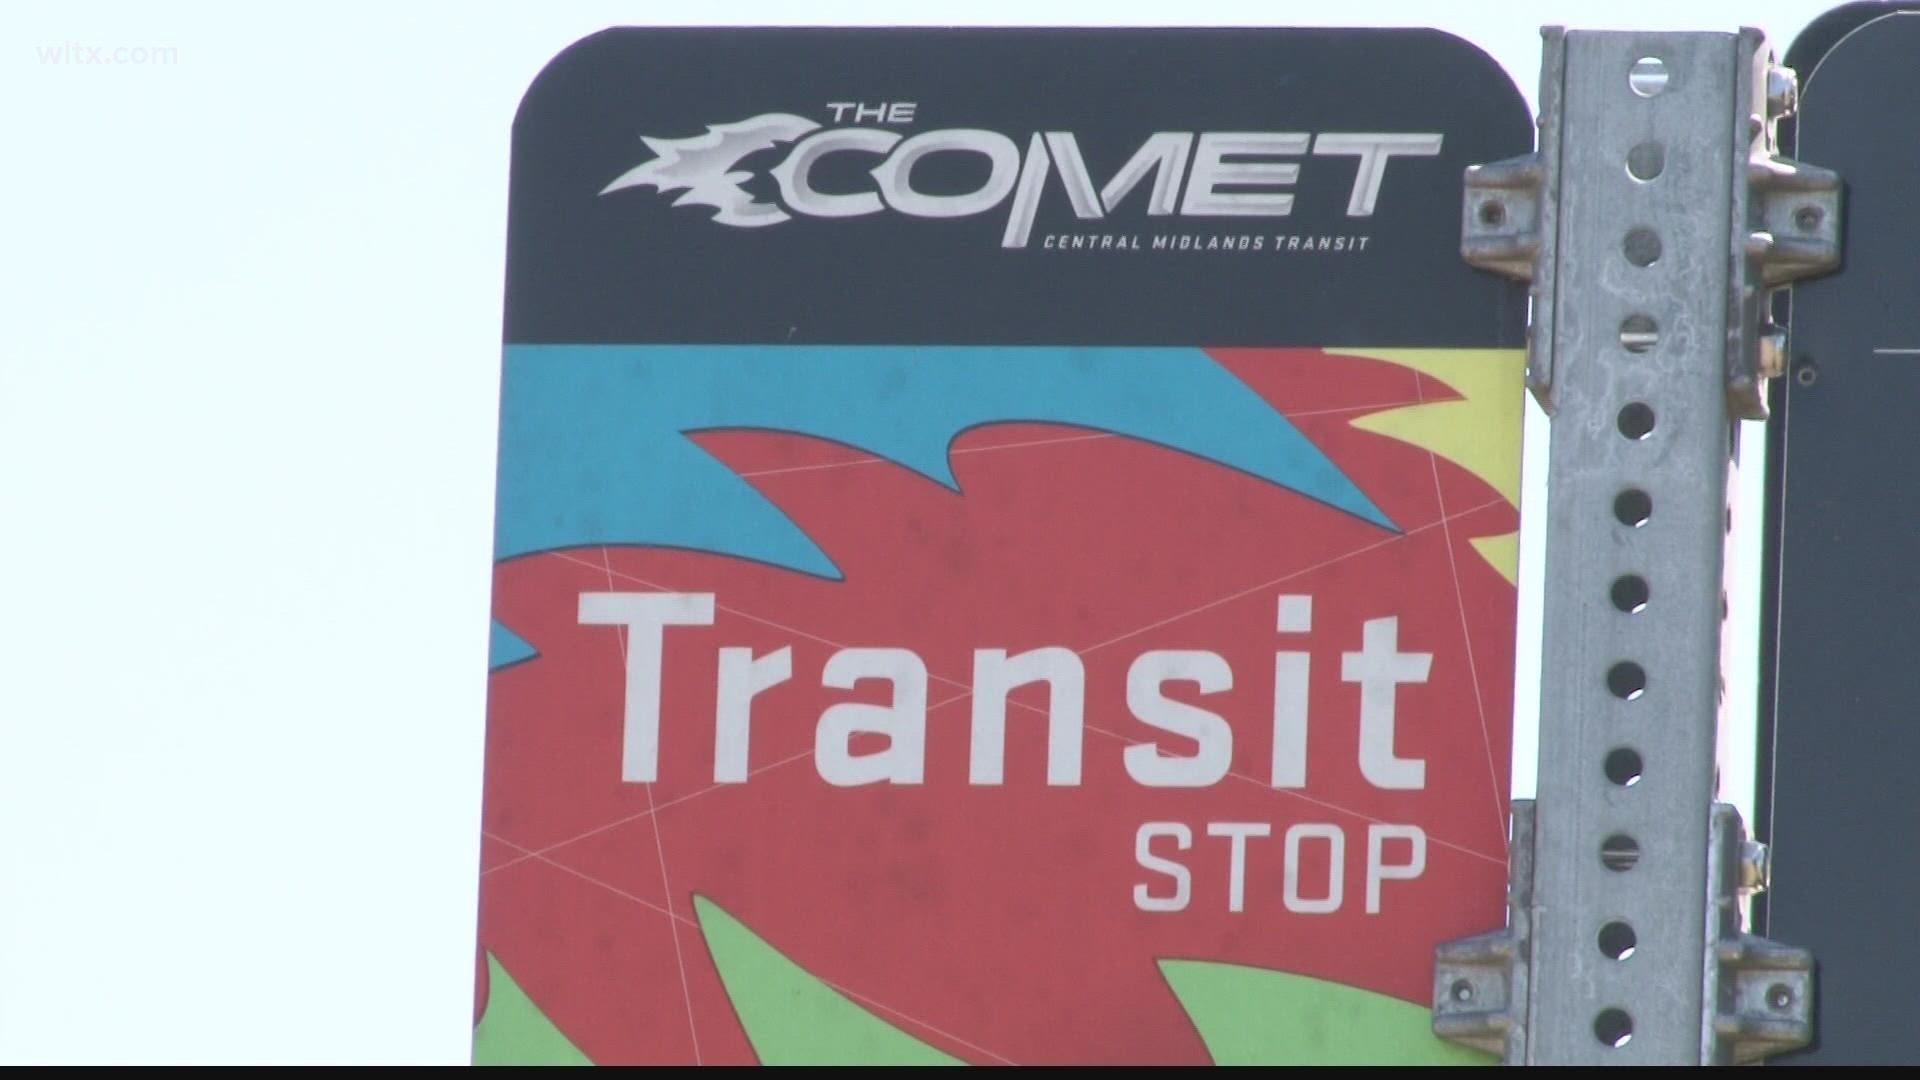 The Central Midlands Regional Transit Authority (COMET) is bringing an end to one of its routes, citing poor ridership.